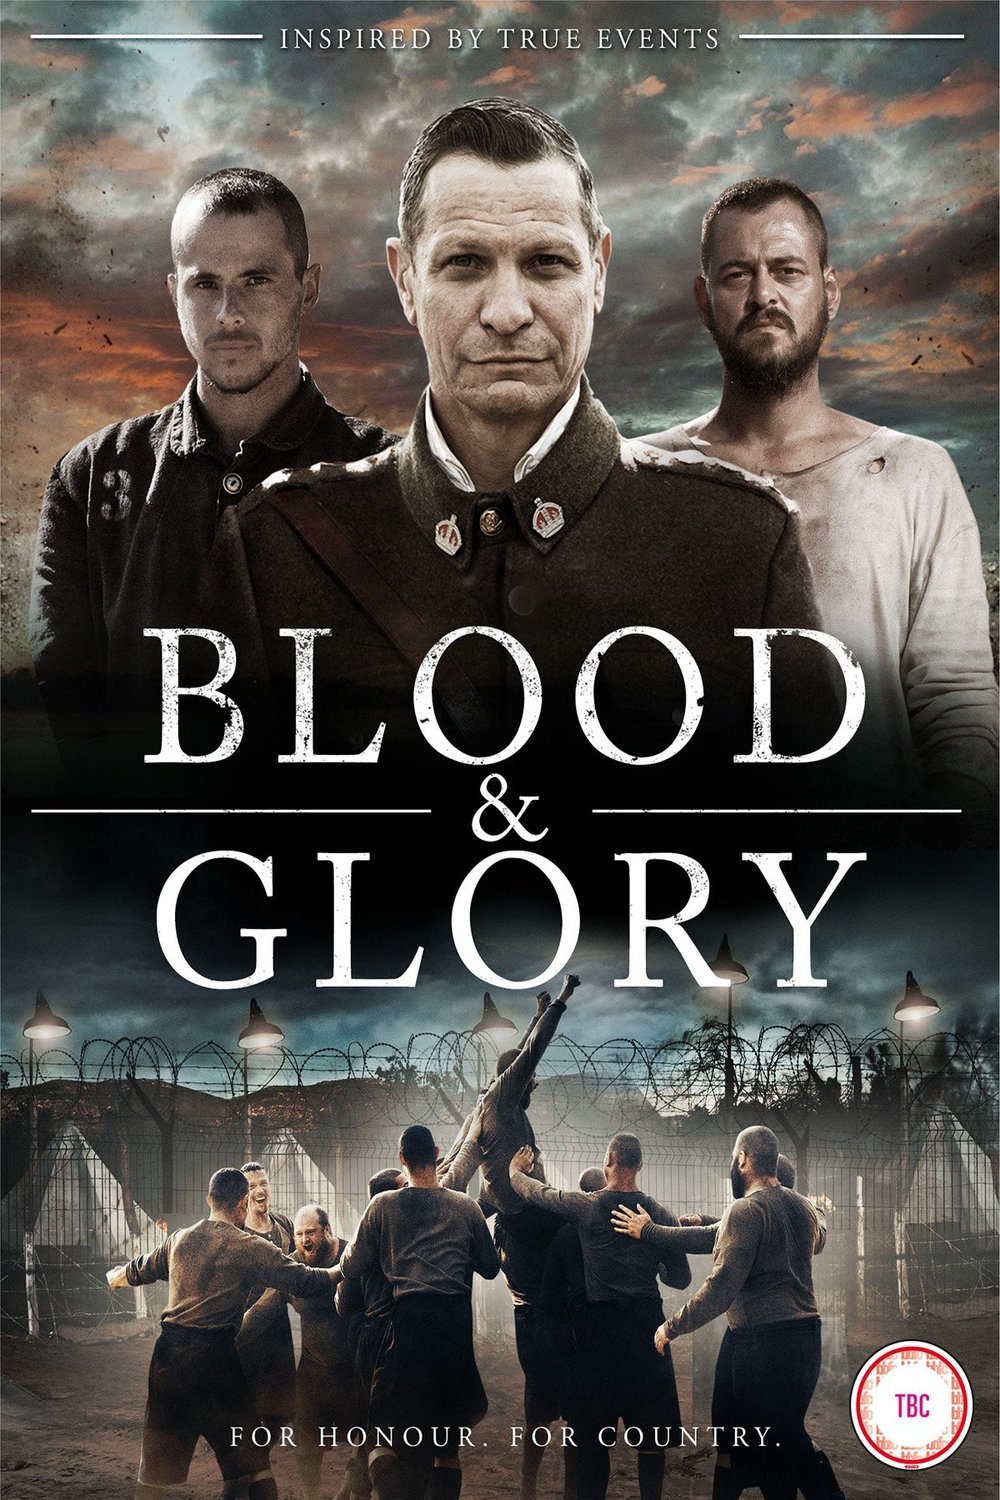 Afrikaans poster of the movie Blood and Glory